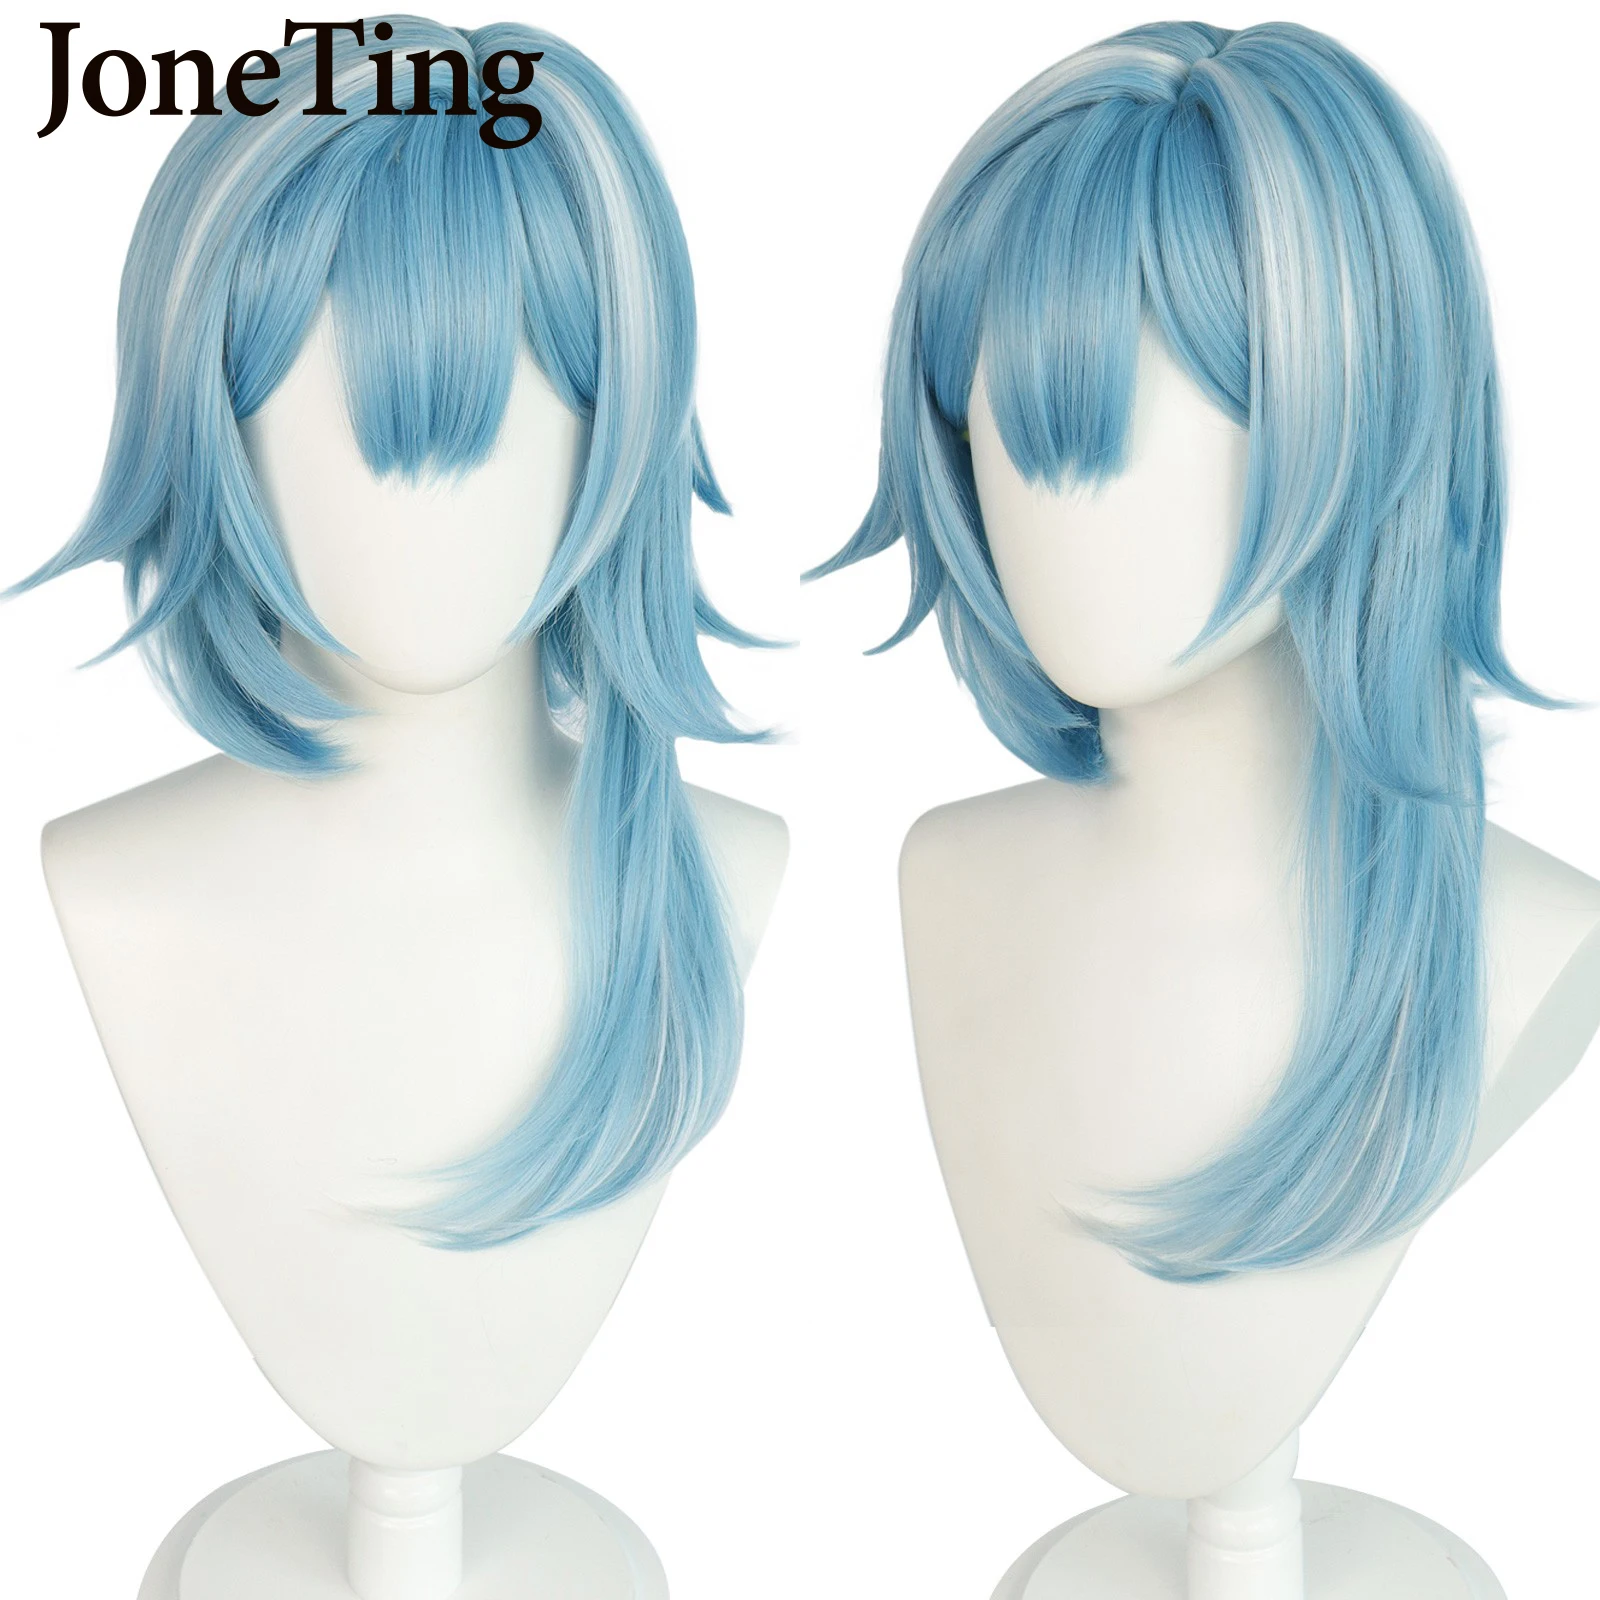 JT Synthetic Eula Cosplay Wigs Game Genshin Impact Long Light Blue Wavy Hair with Bangs Heat Resistant Fiber Wig Machine Made bubuwig synthetic hair genshin impact klee cosplay wigs women 35cm medium long straight light blonde ponytail wig heat resistant